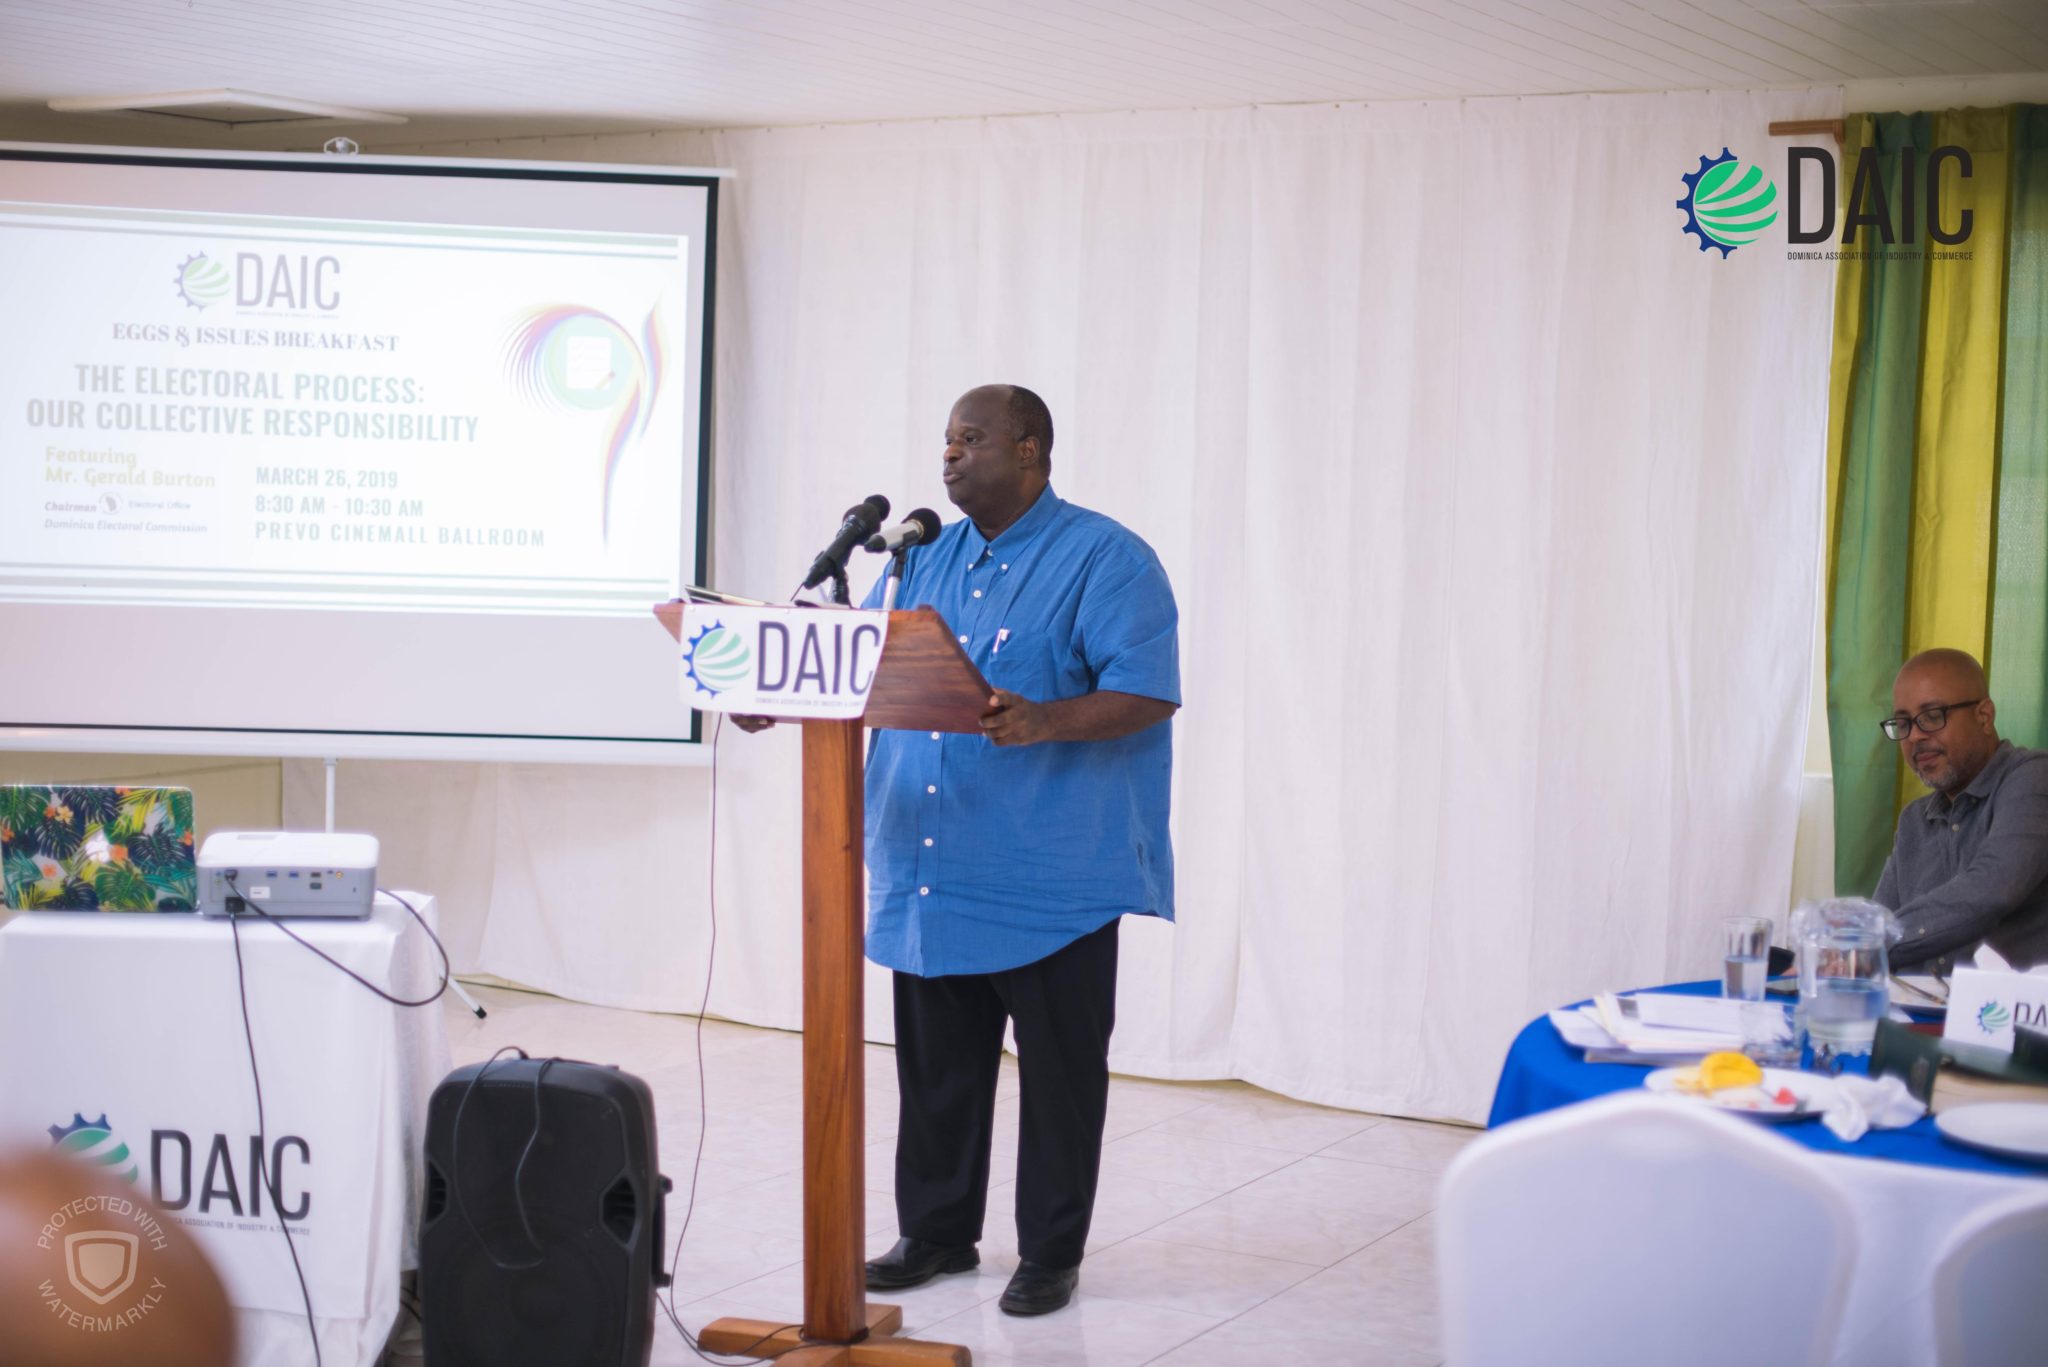 DAIC Encourages the Private Sector and other Stakeholders to Fulfill Responsibility in Electoral Process